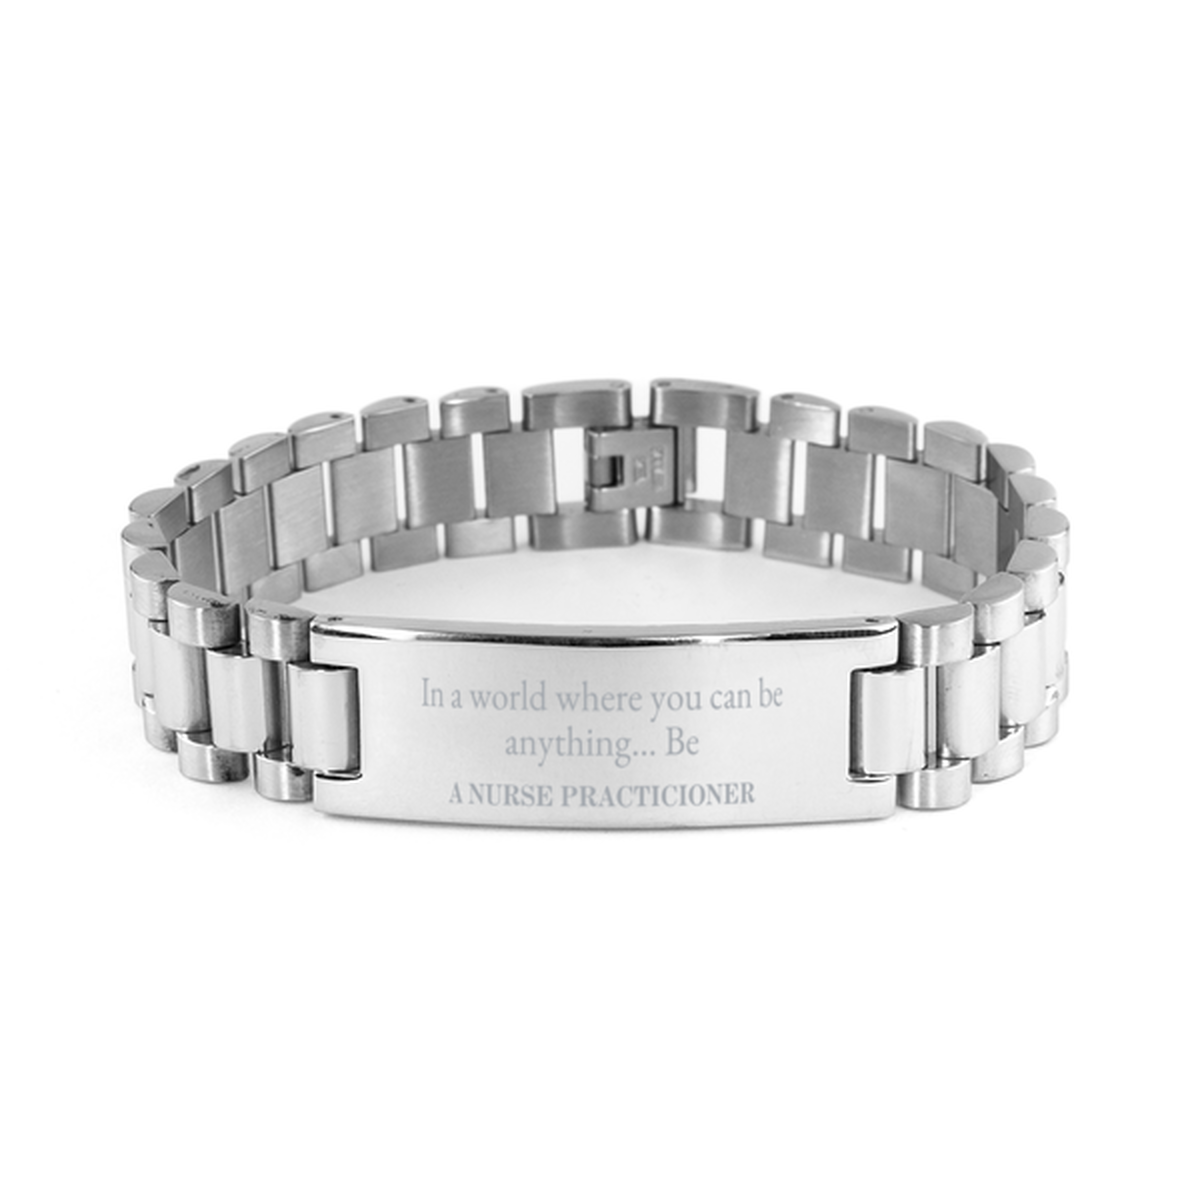 Gifts for Nurse Practicioner, In a world where you can be anything, Appreciation Birthday Ladder Stainless Steel Bracelet for Men, Women, Friends, Coworkers